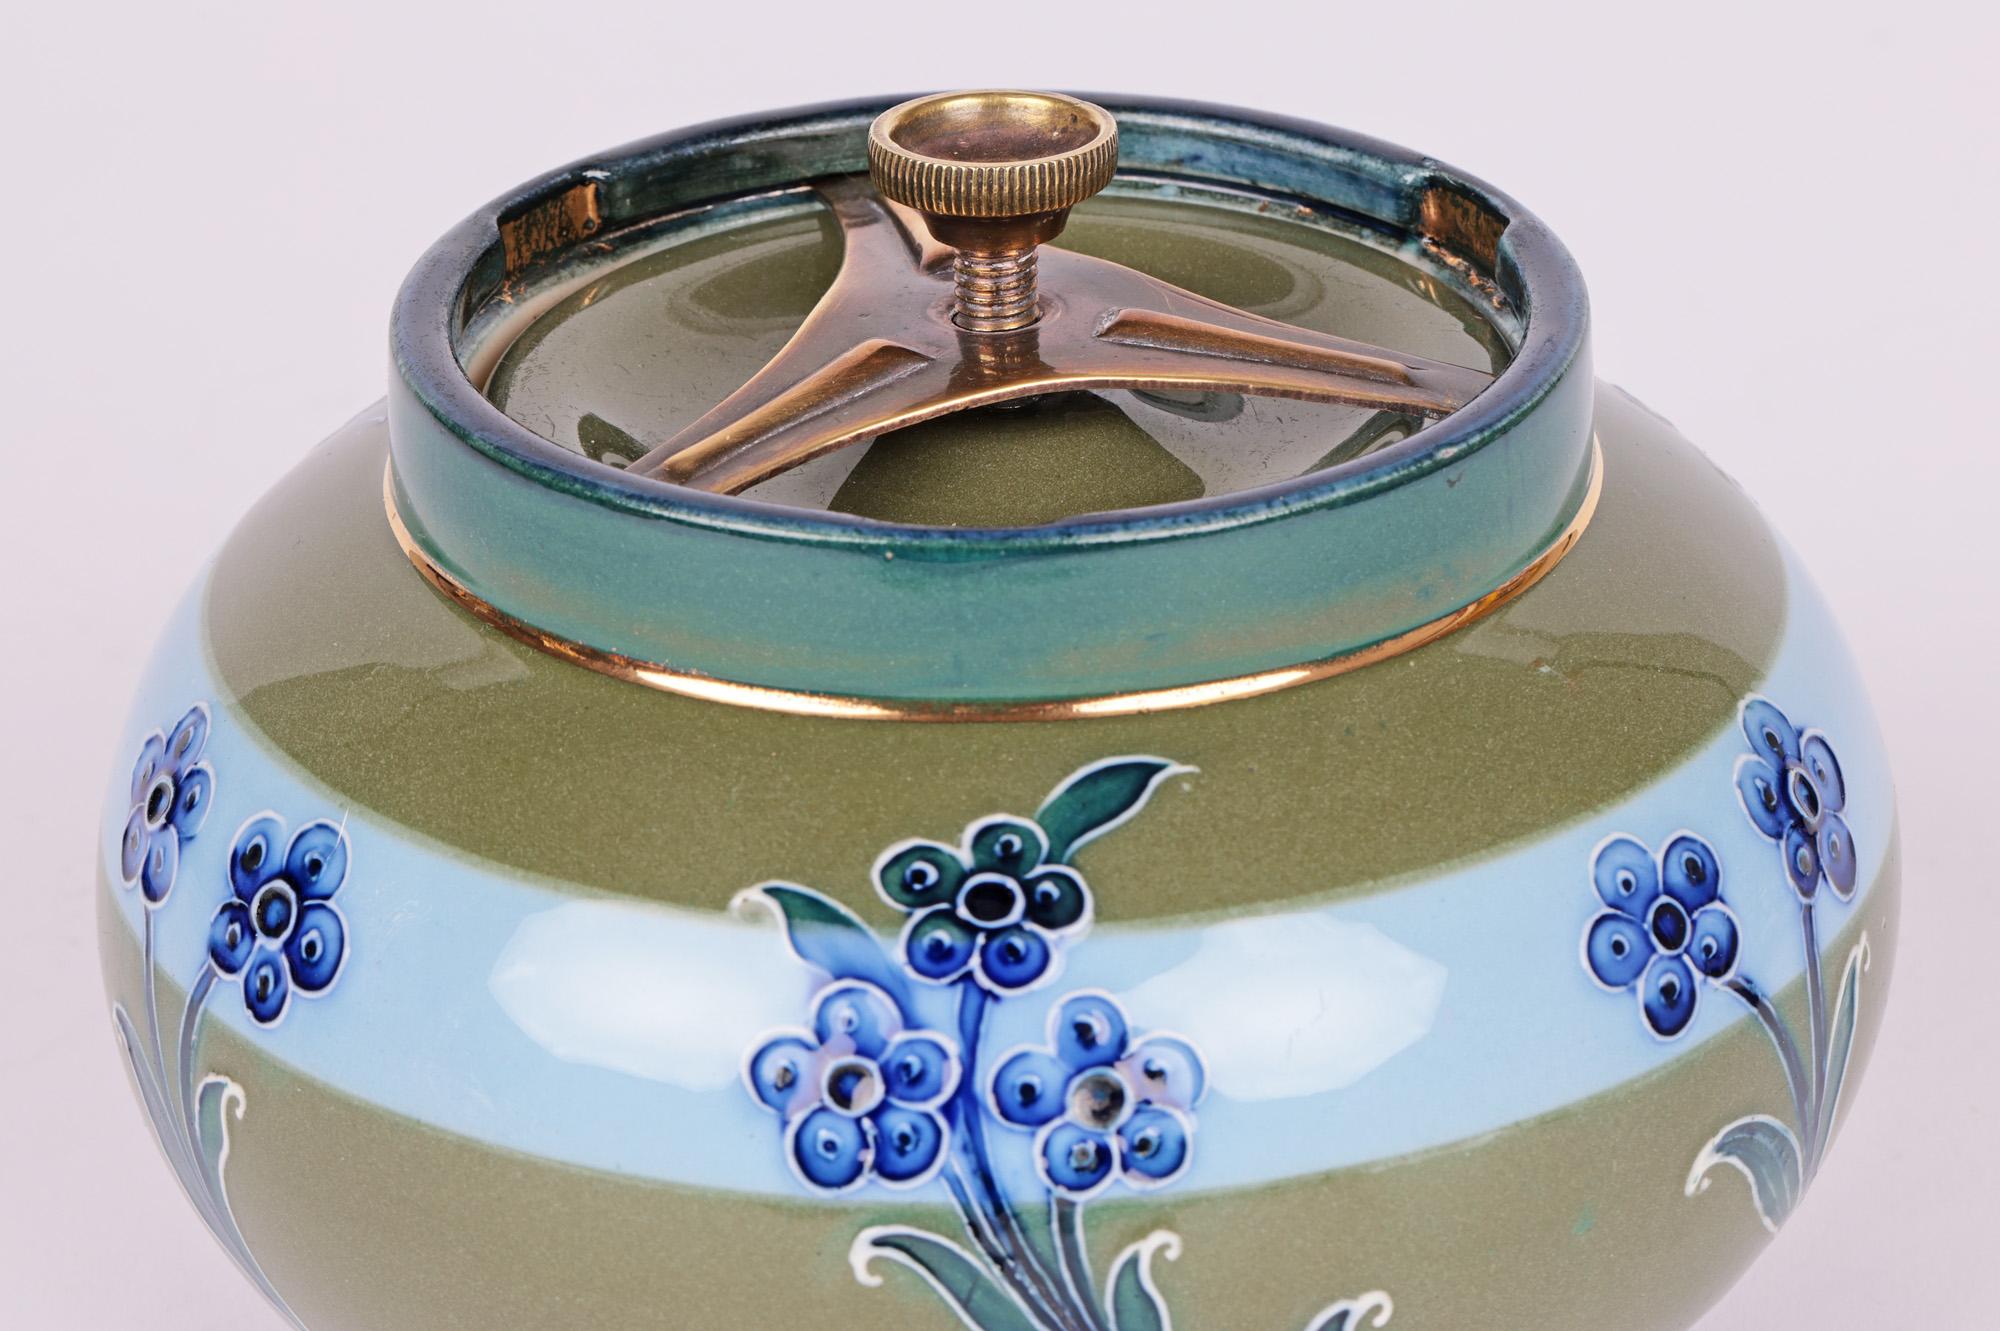 Art Nouveau James MacIntyre & Co lidded tobacco jar decorated with tubelined daisies designed by William Moorcroft (English, 1872-1945) and dating from around 1900. William Moorcroft started out as a designer before becoming director of the art